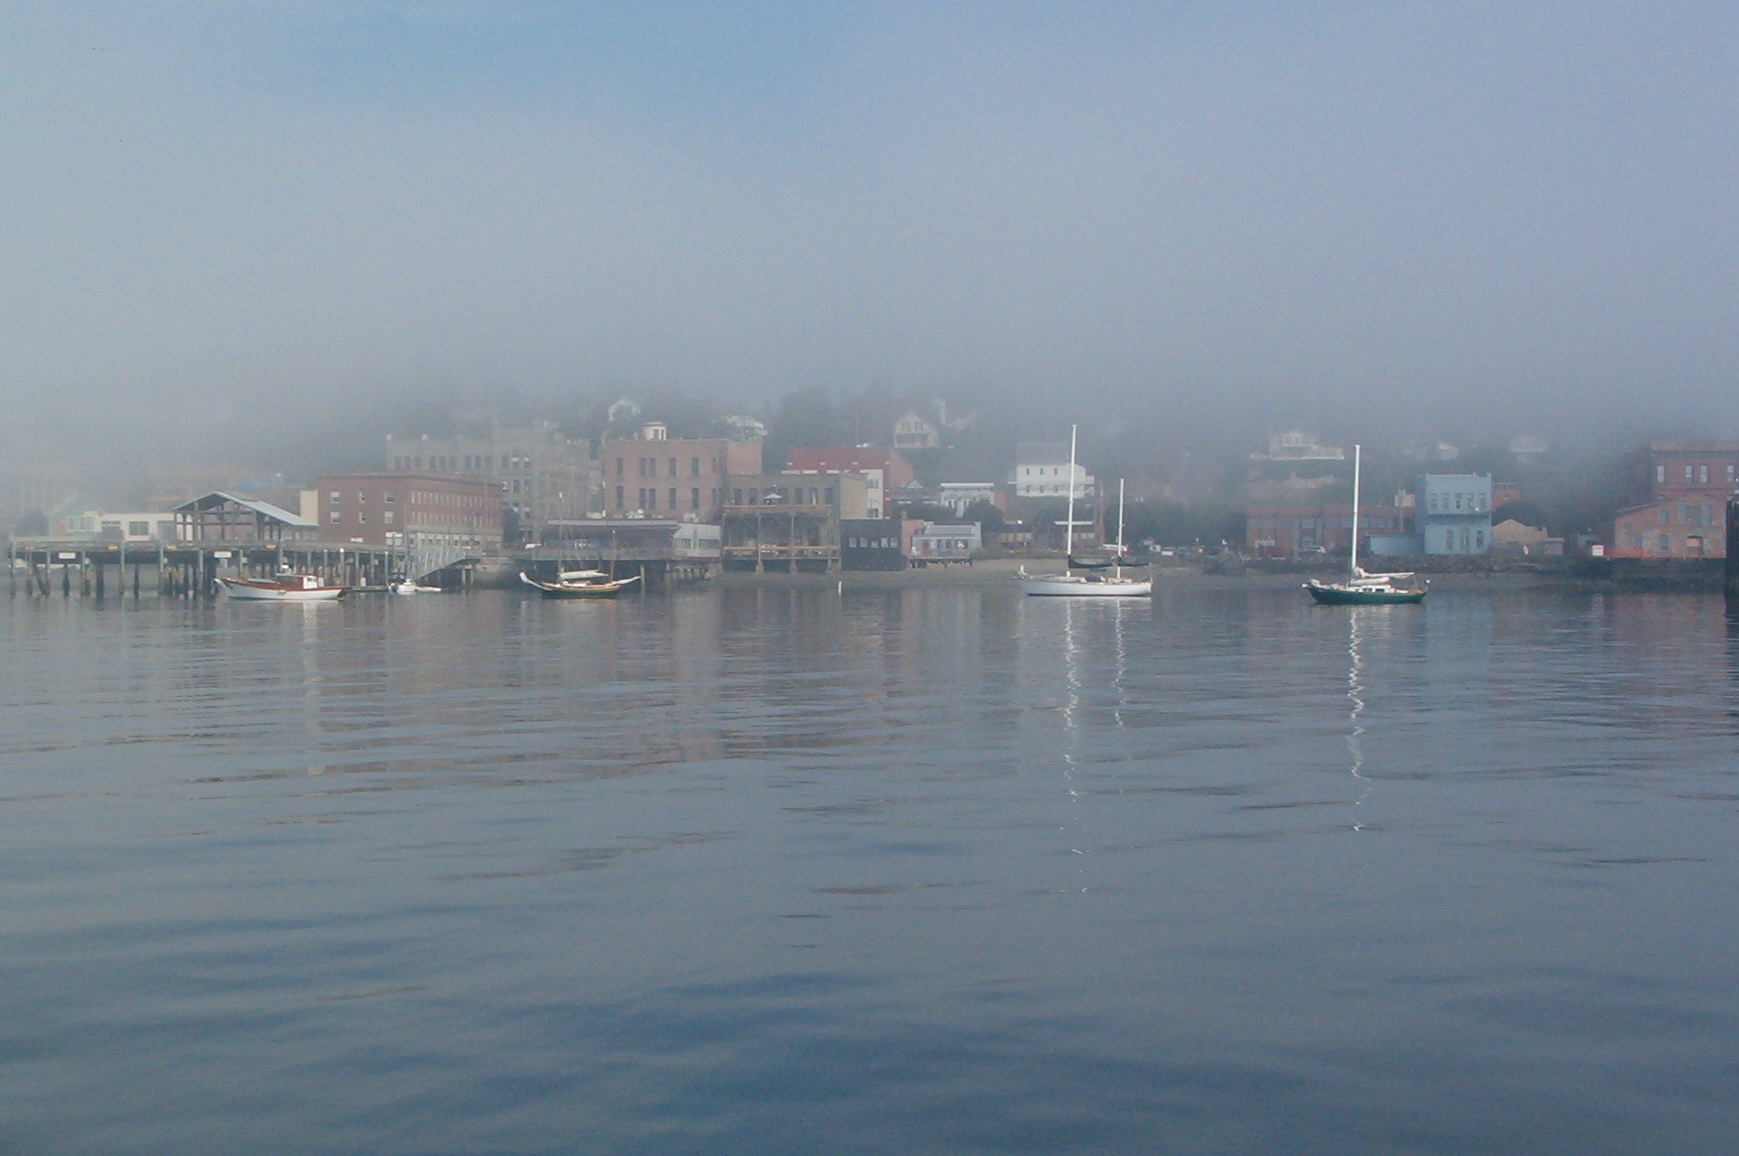 Port Townsend's downtown waterfront in the fog